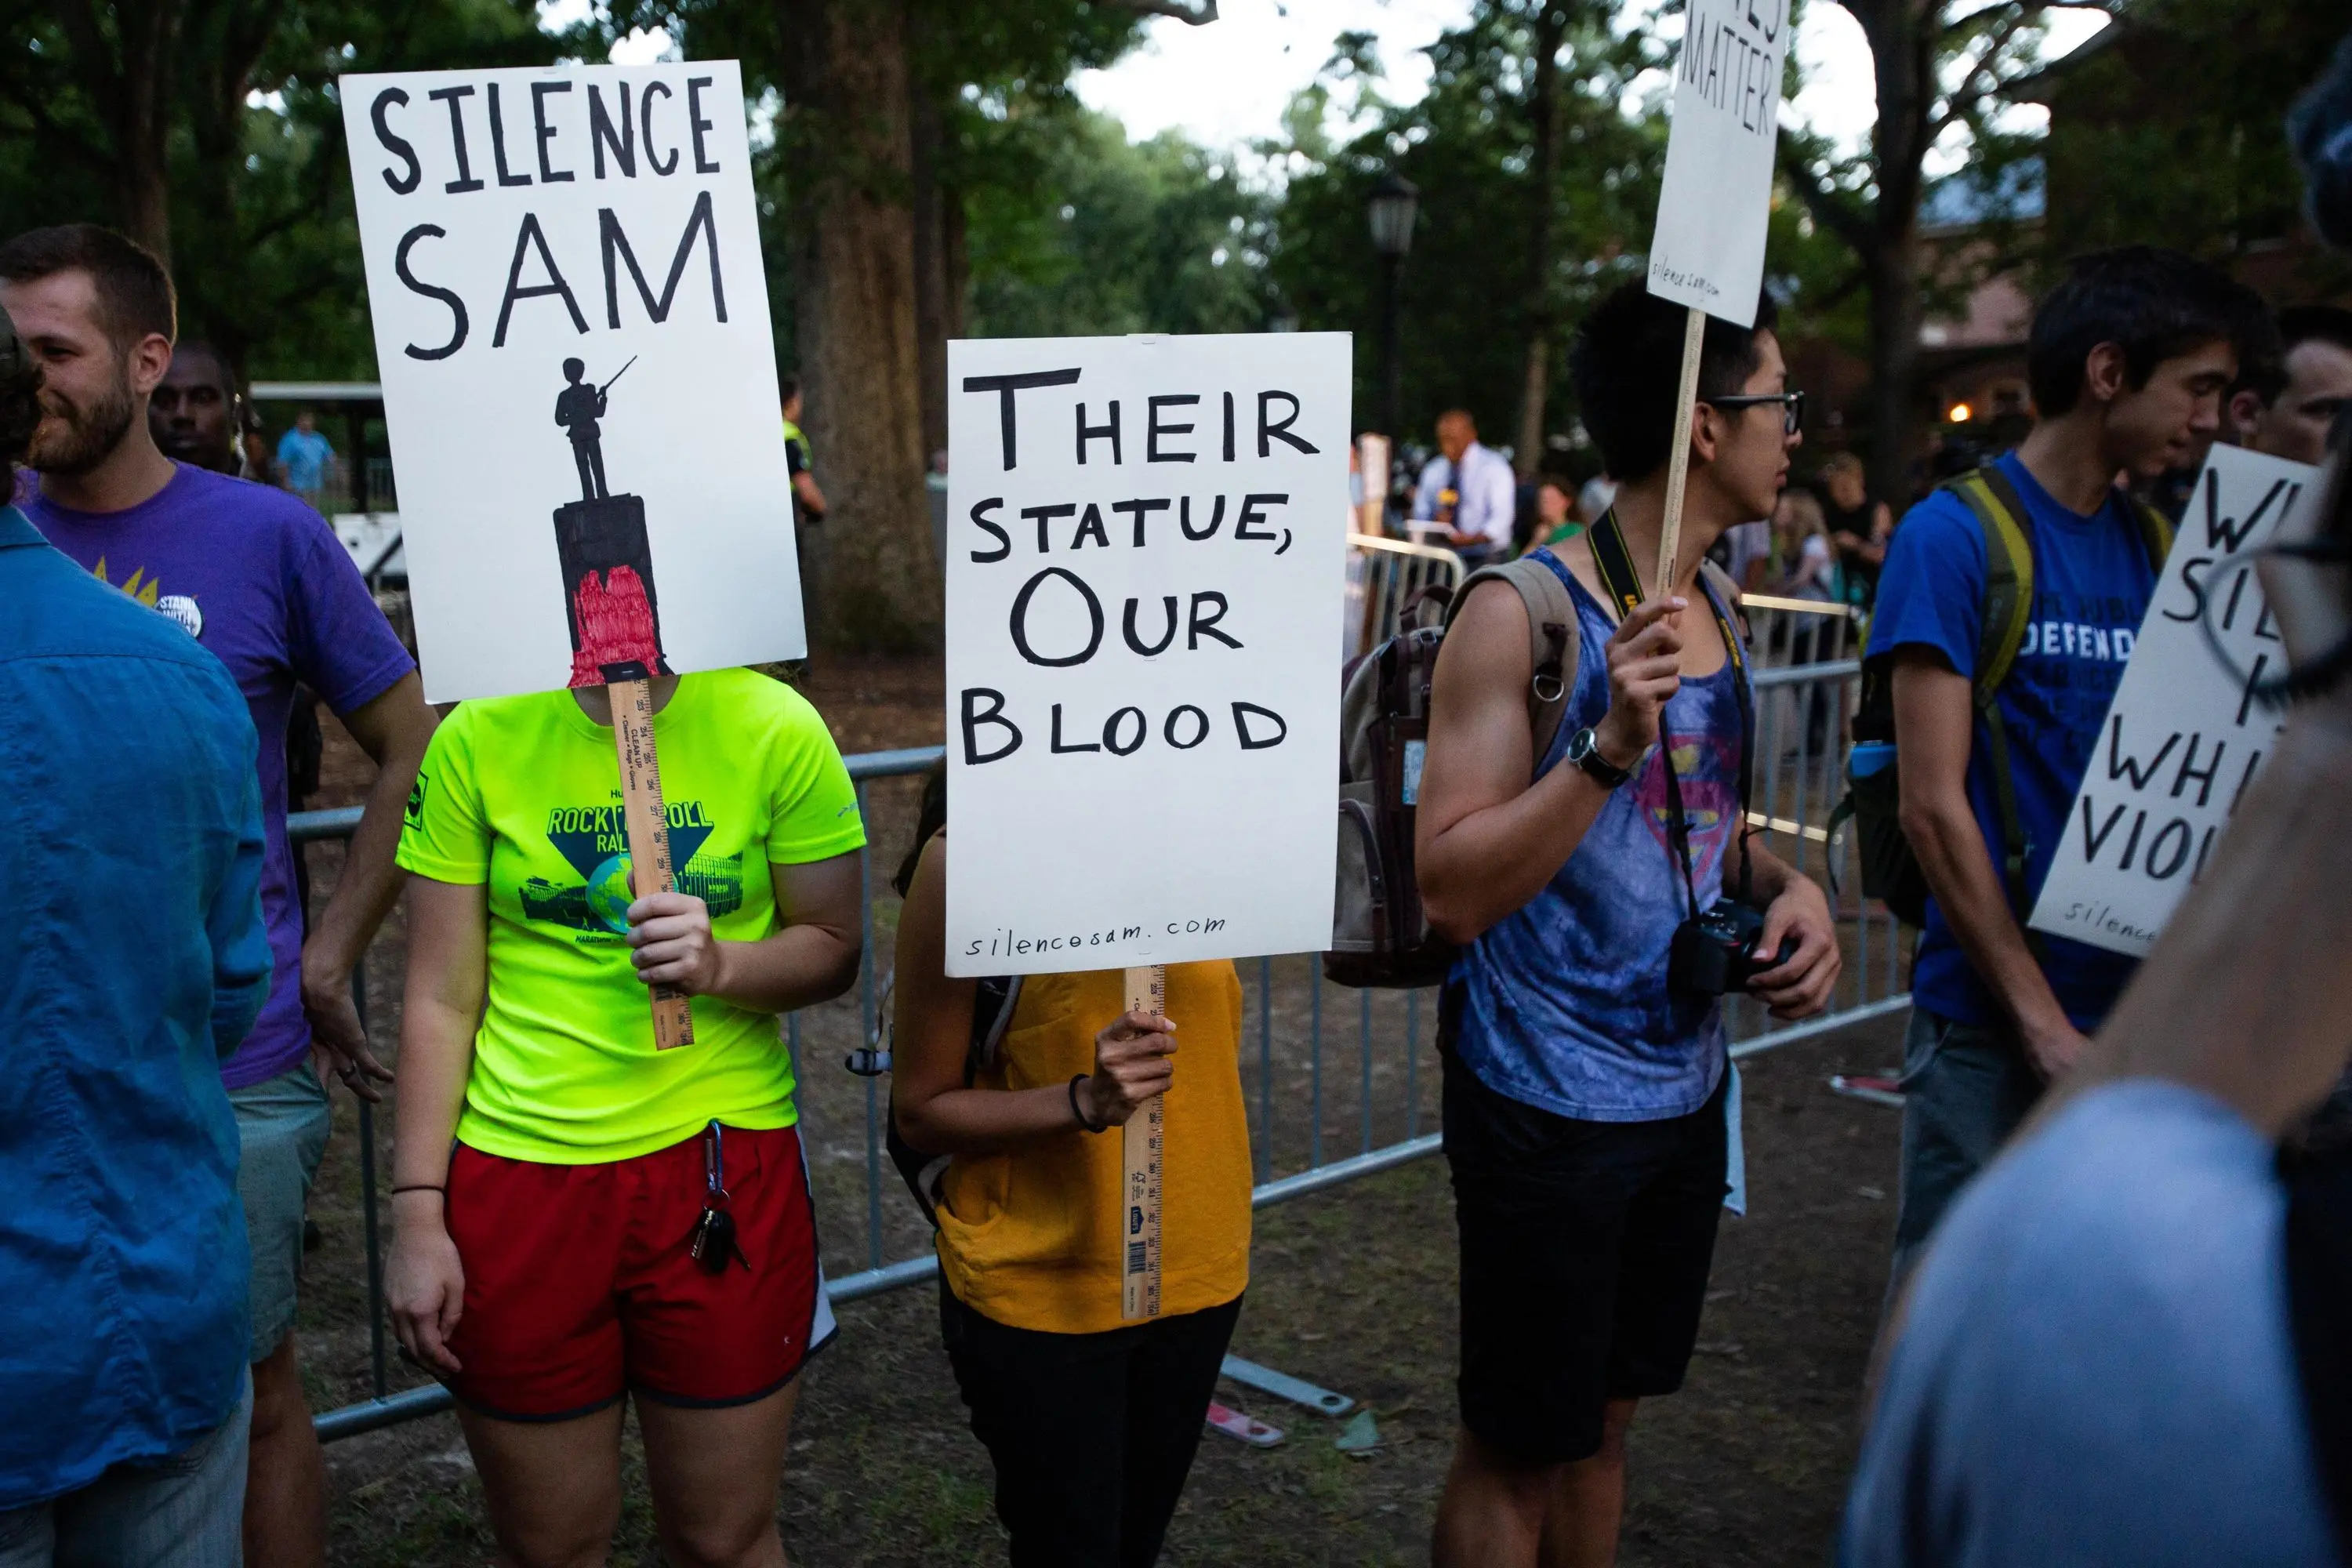 Students hold signs protesting the Silent Sam statue in Chapel Hill, North Carolina. 